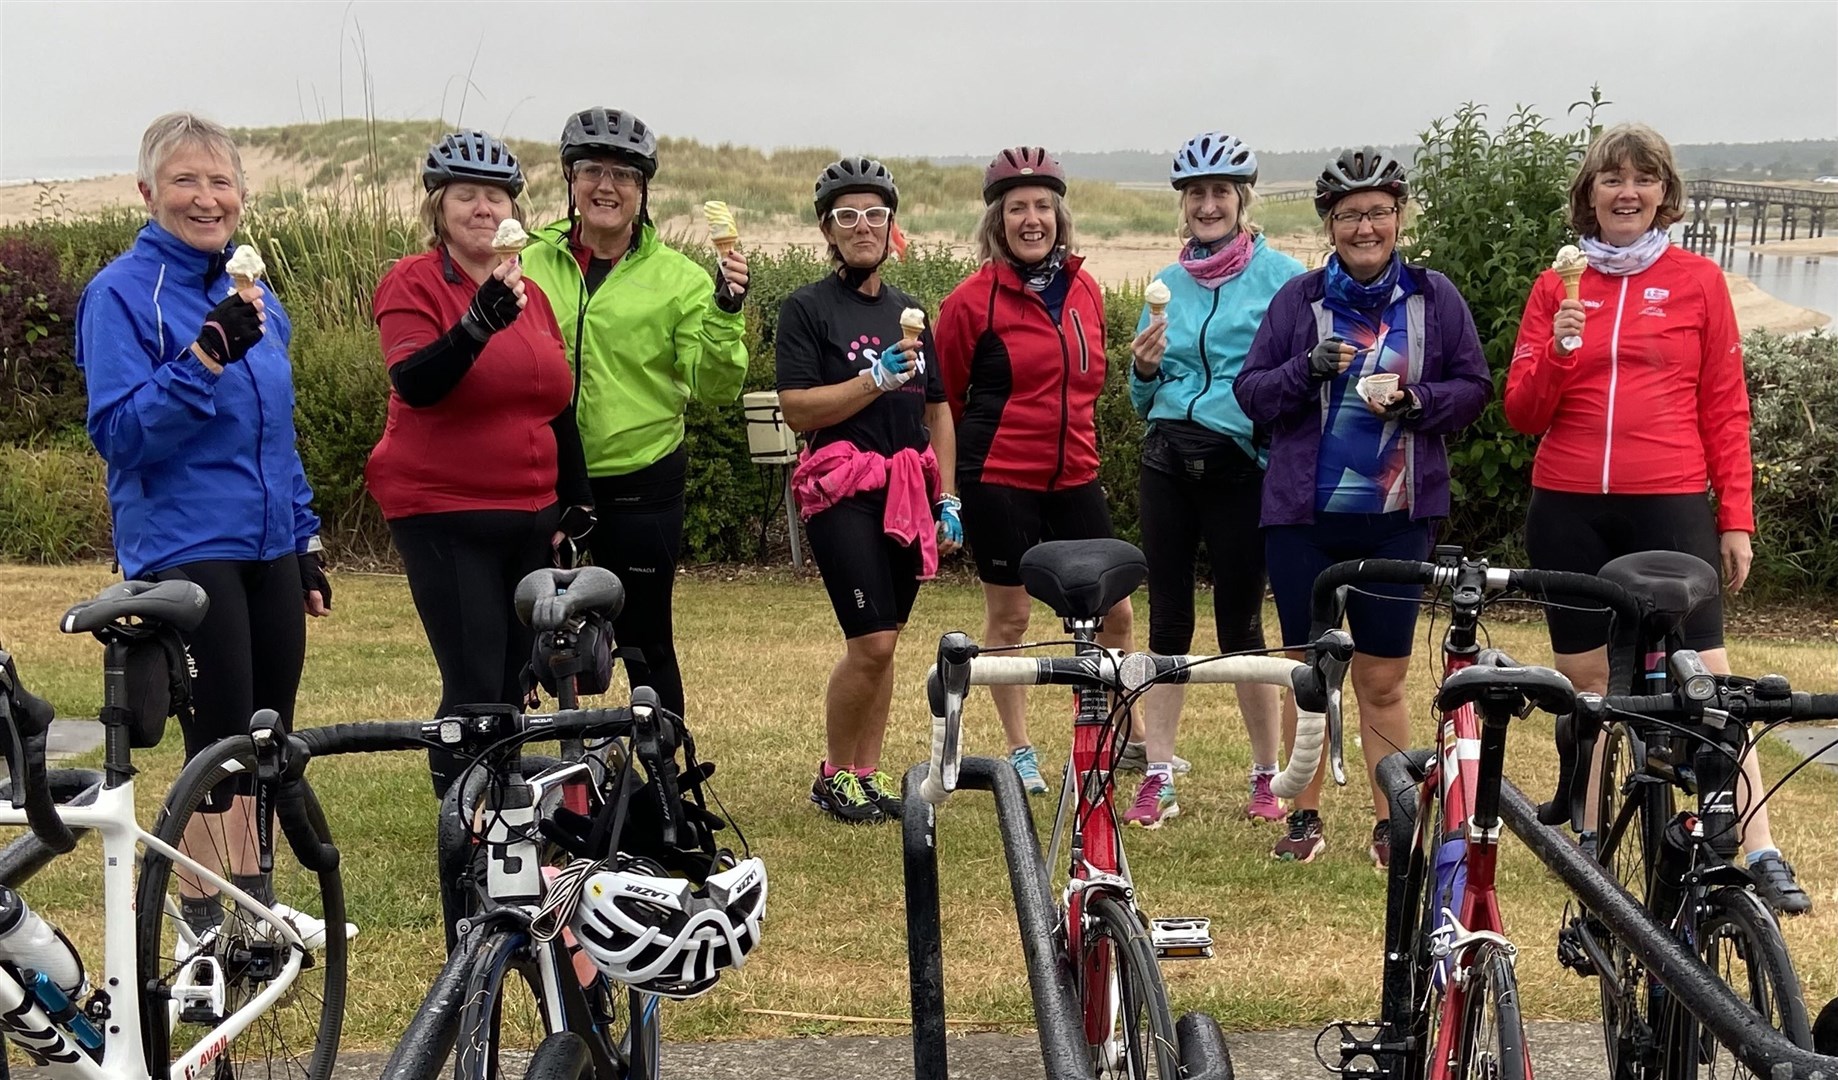 Elgin Breeze Champion and ride leader Diane Maciver (right) with some local Breeze cyclists on a previous outing.